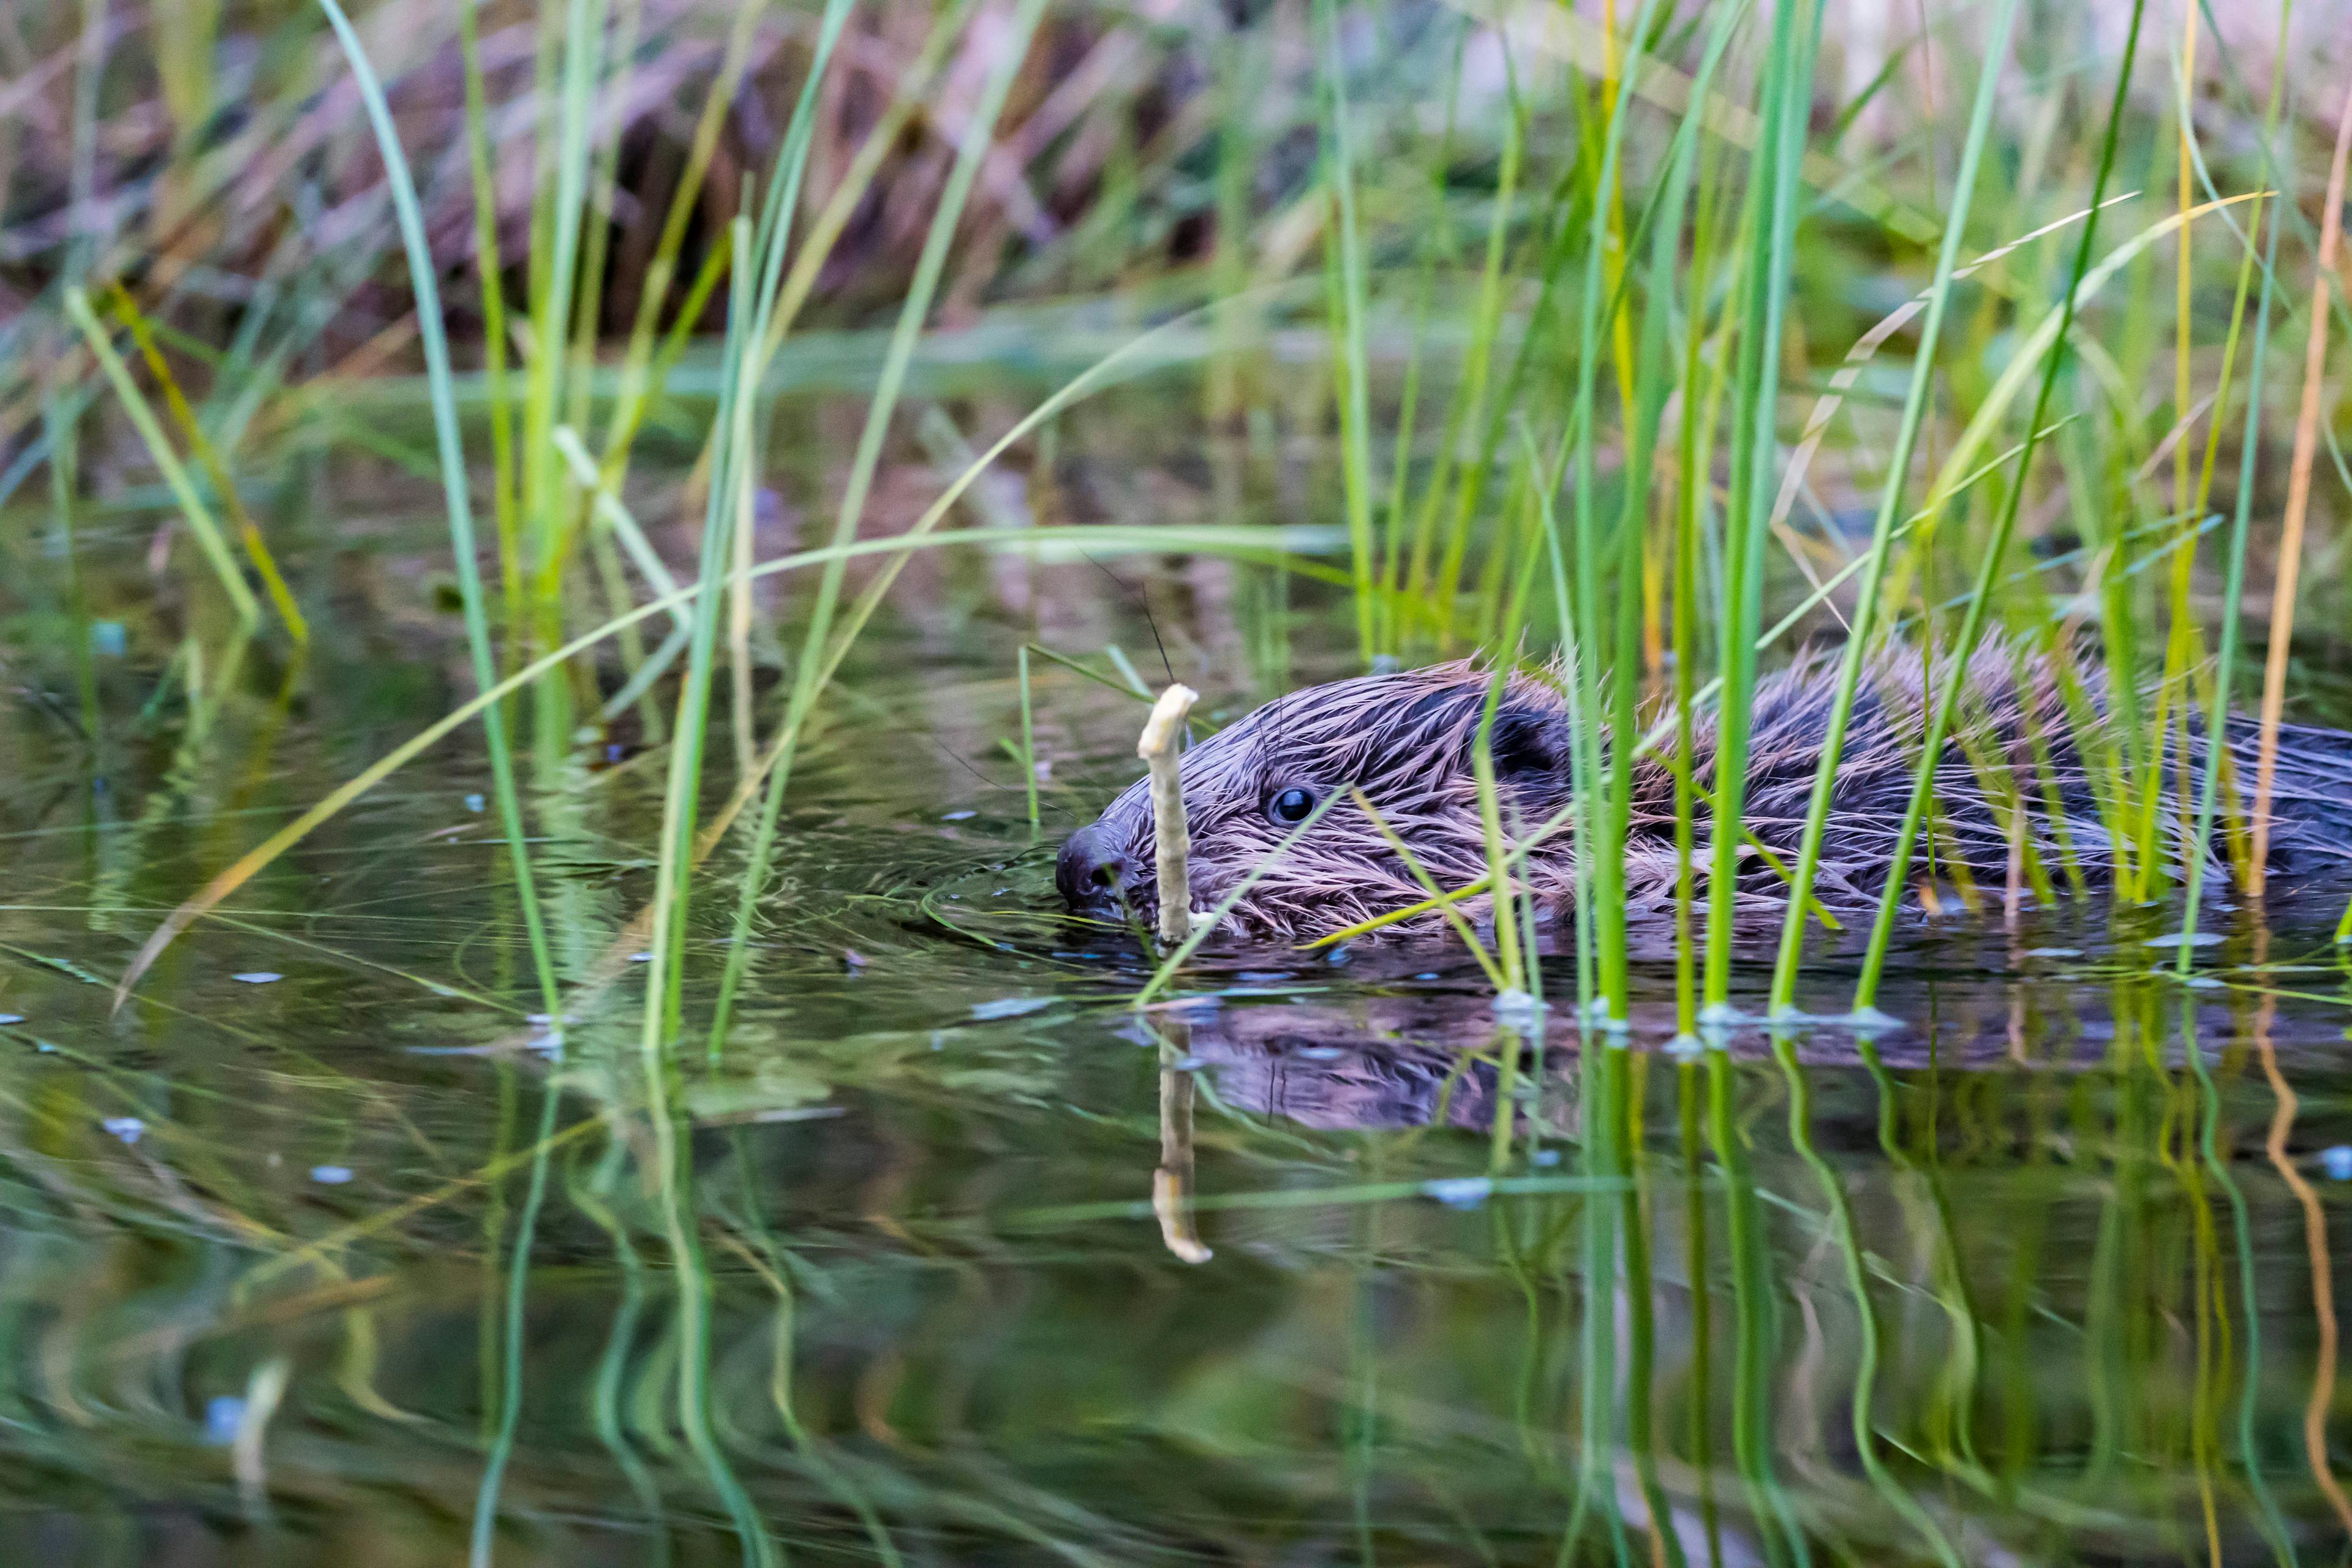 A small beaver kit with a stick in its mouth hiding in grass sticking out of the water. Spotted during a beaver safari with Nordic Discovery in Sweden.